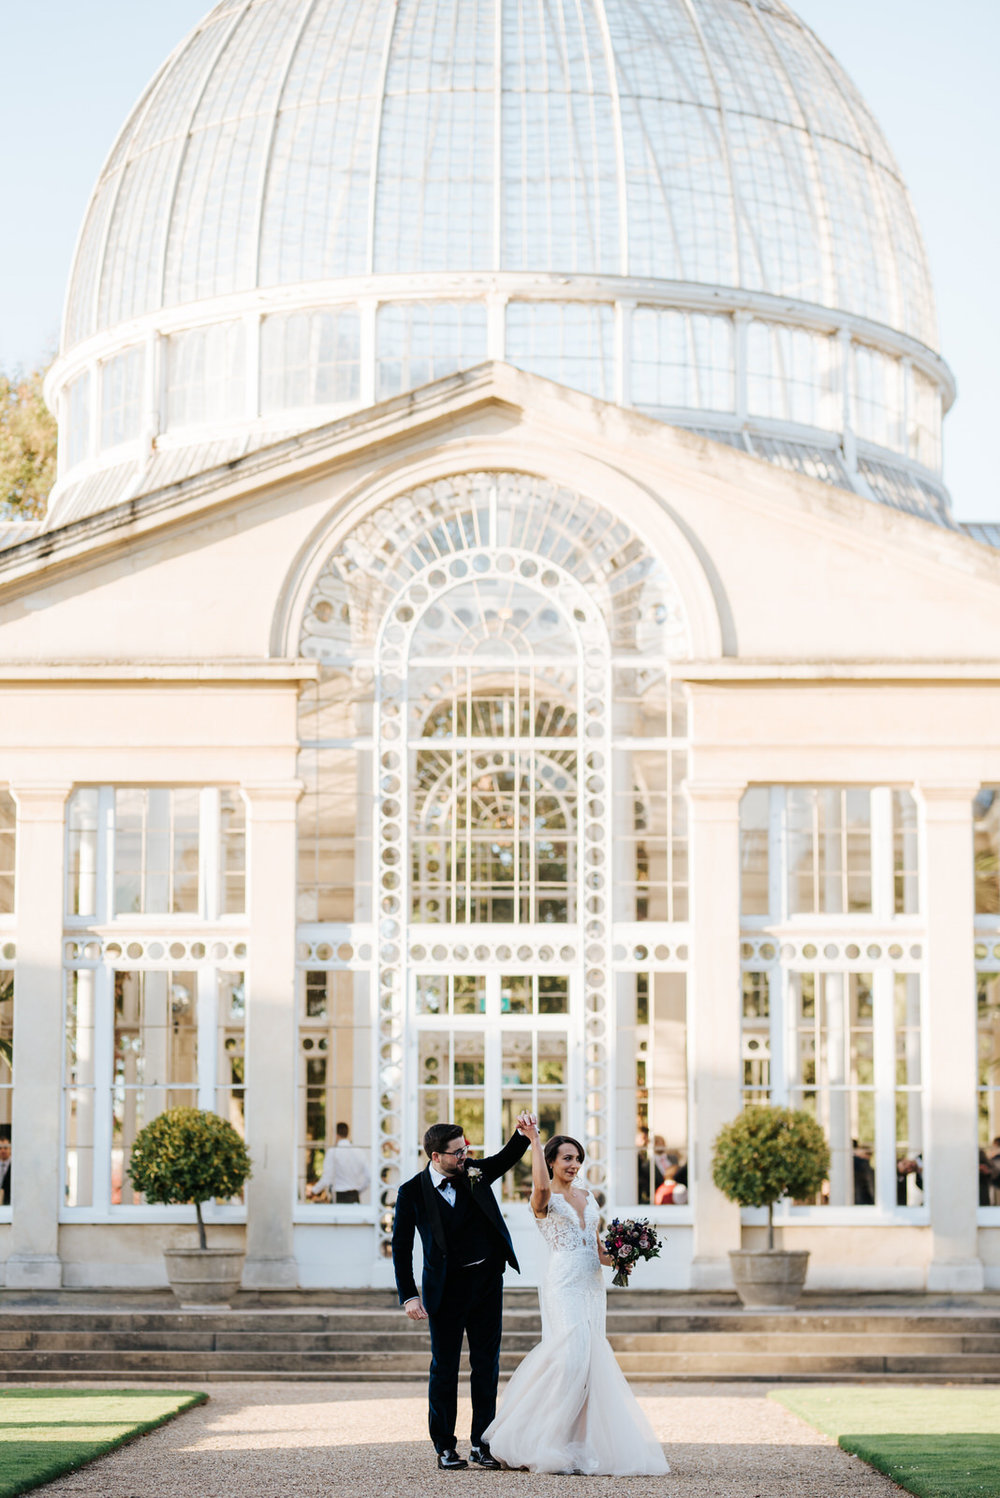 Bride and groom dance in front of Syon House's great conservatory building